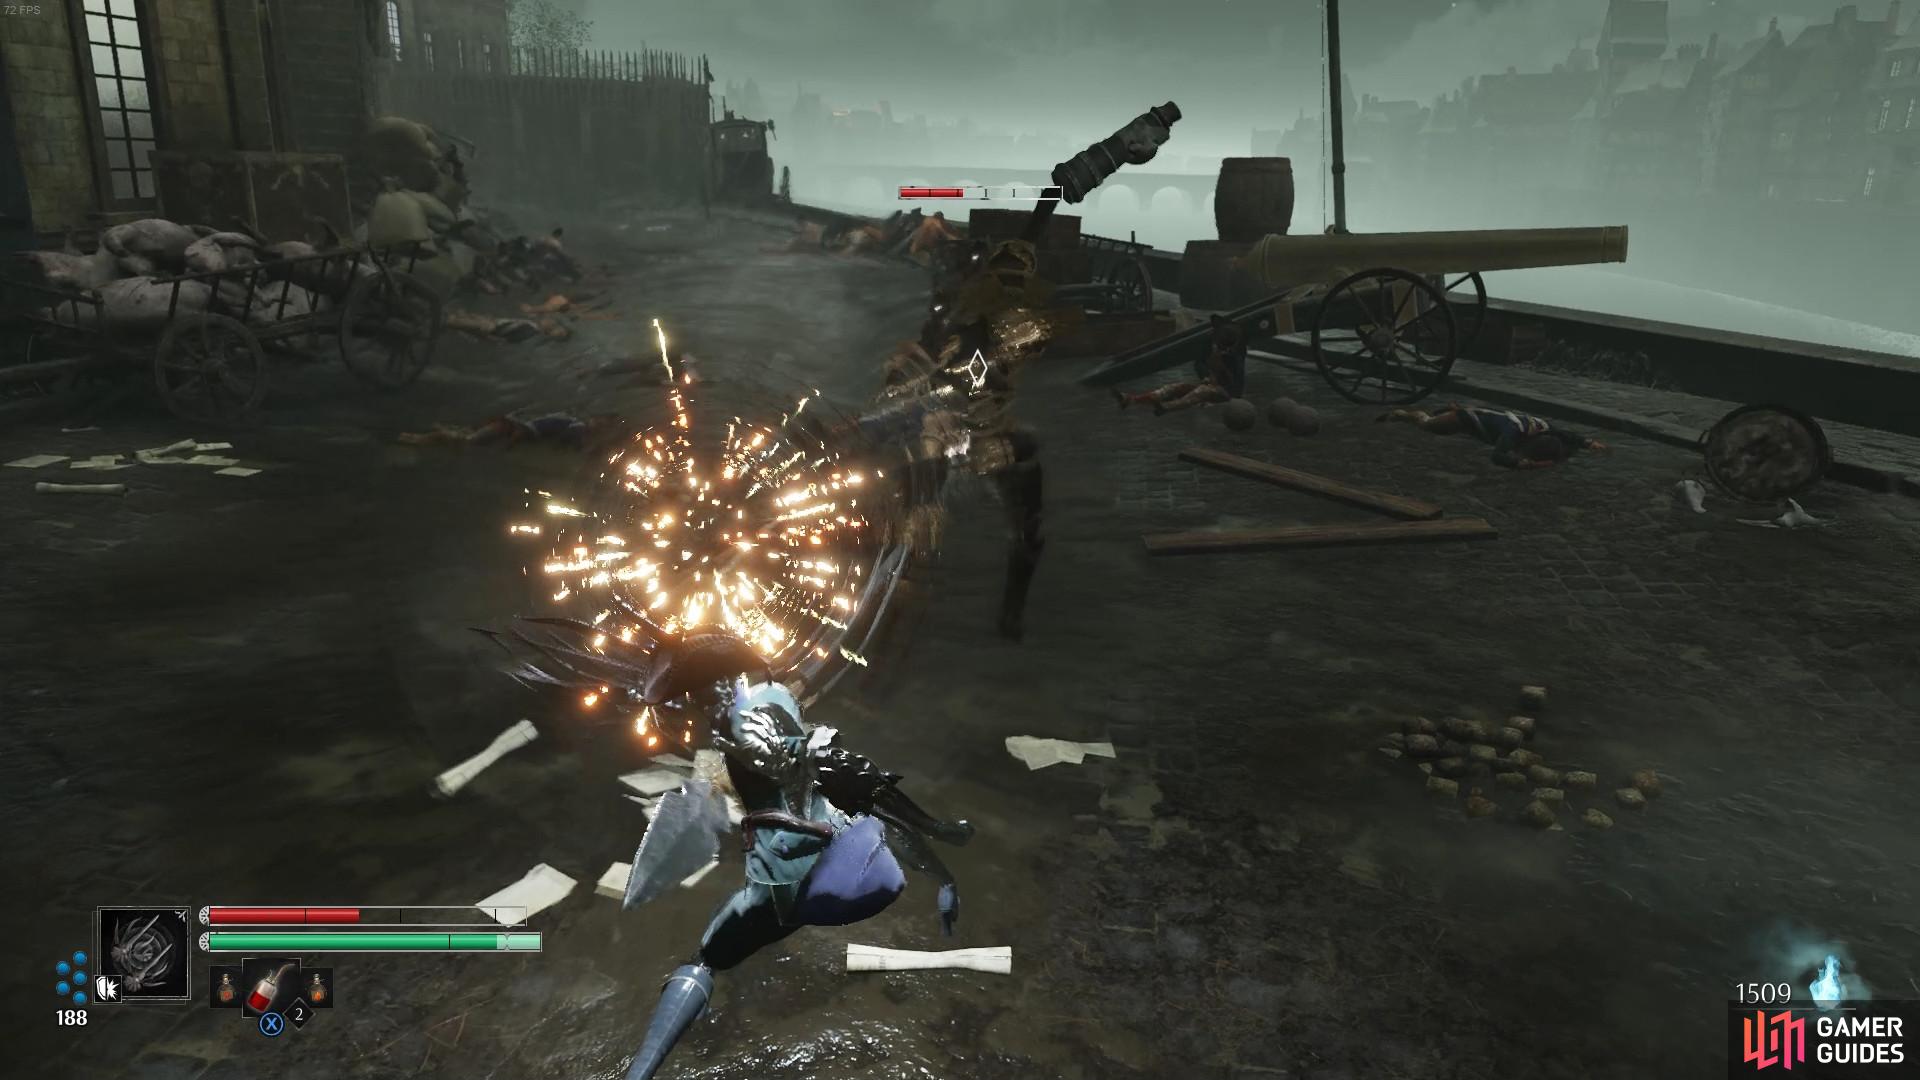 We teach you how to counterattack in Steelrising.